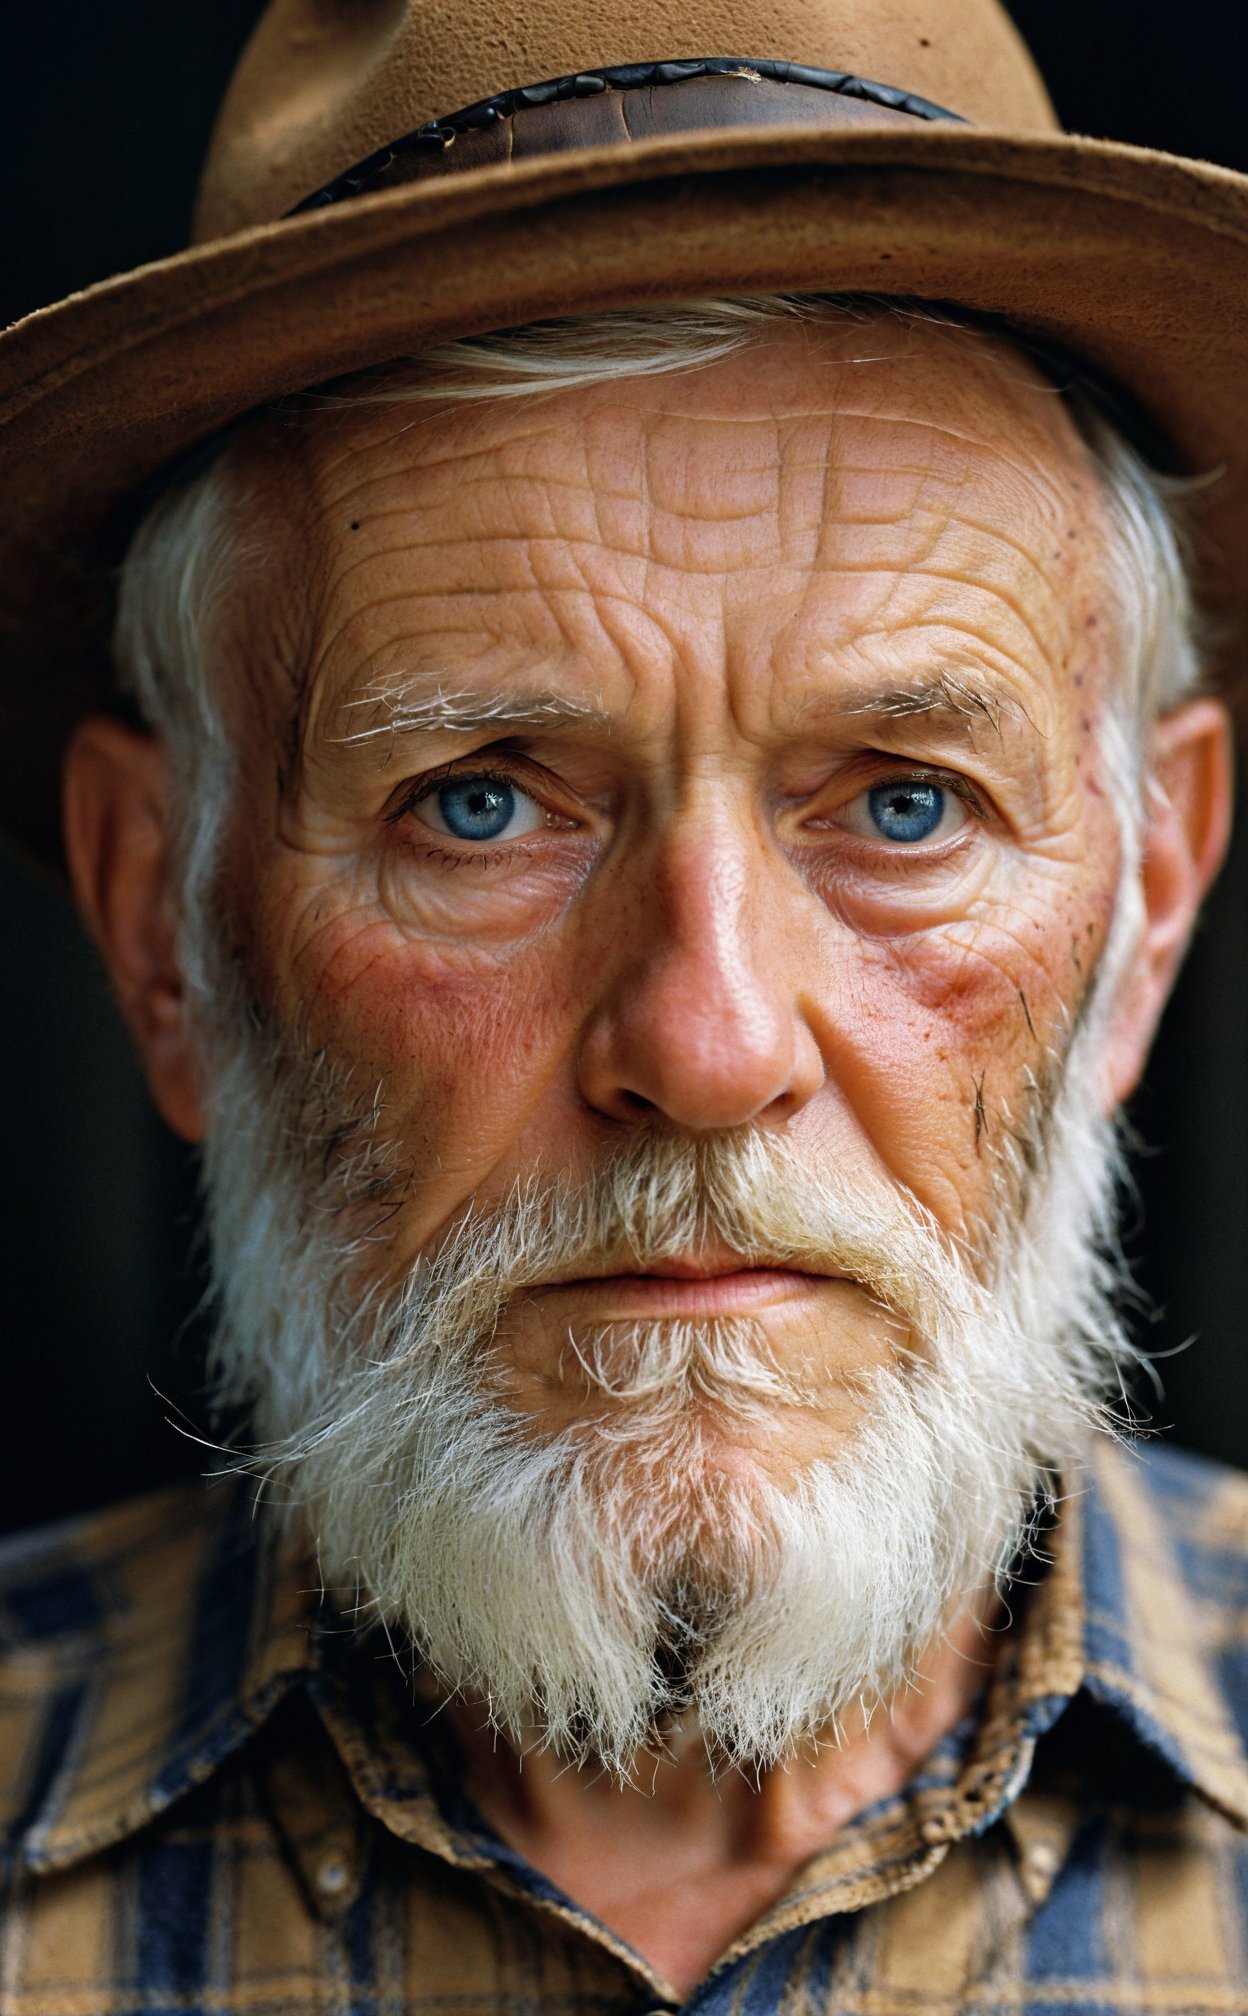 film photography aesthetic,Intense close-up portrait, elderly man with piercing blue eyes, weathered skin, pronounced wrinkles, white full beard, stern expression conveying a life of experience, wearing a brown felt hat, plaid shirt with collar visible, dark background emphasizing facial features, natural lighting accentuating skin texture, somber mood through high contrast and sharp detail, fine art photography with a hyperrealistic style, emphasis on character and emotion, eyes as a focal point providing depth and connection, absence of obvious digital manipulation preserving organic qualities.,Vibrant,whimsical